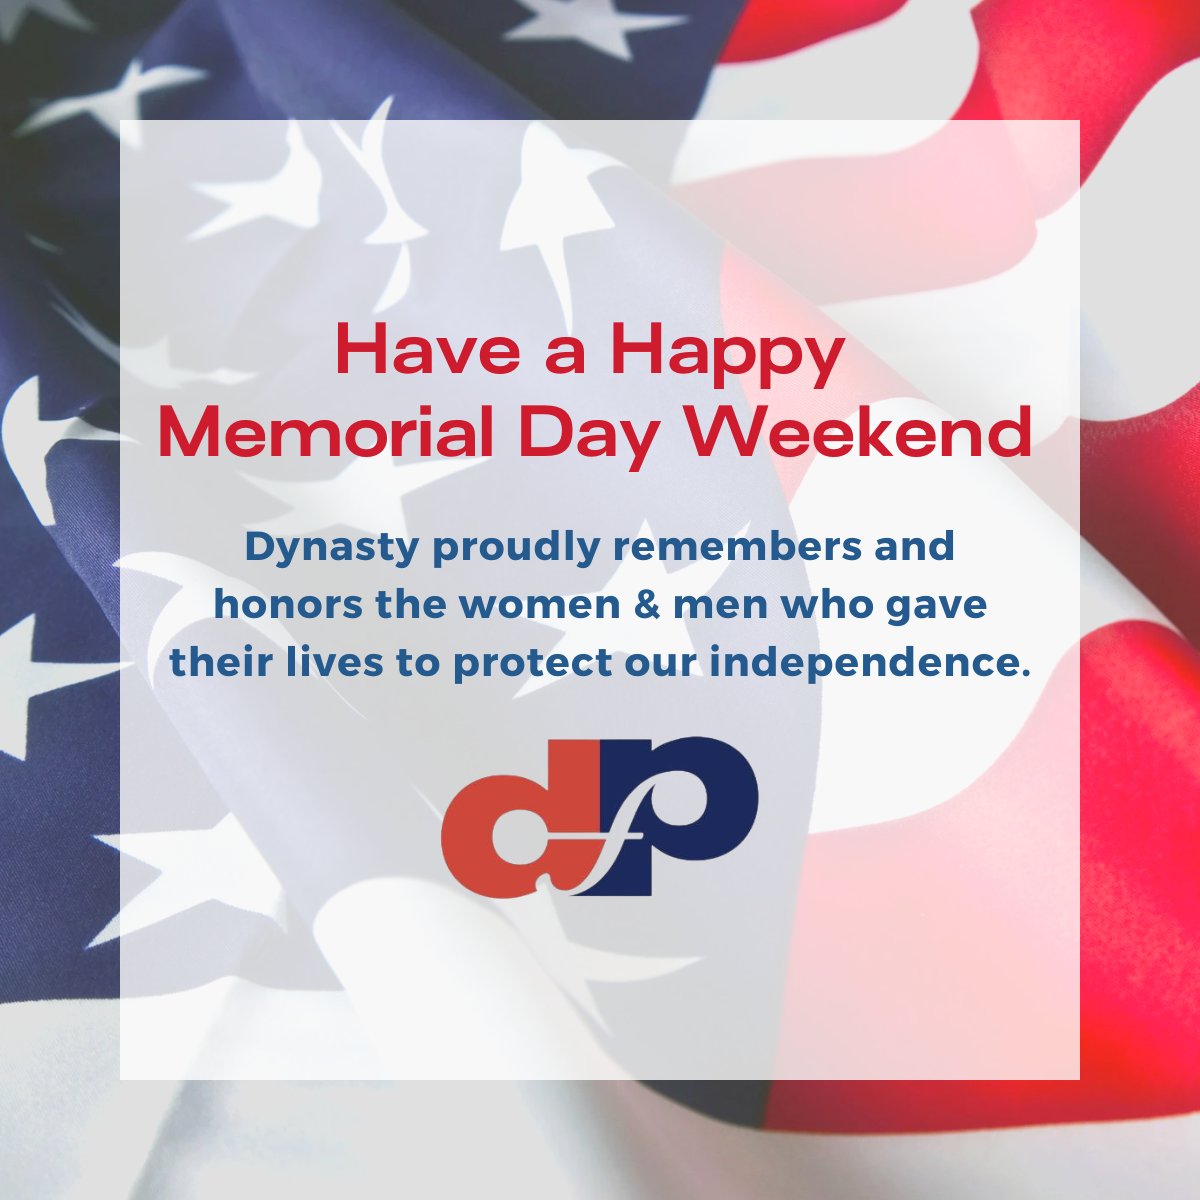 On this Memorial Day weekend, our Dynasty team will take time to remember and honor the sacrifices of the women and men across our US military and their families. Thank you for your service and dedication to protecting our country and our independence.